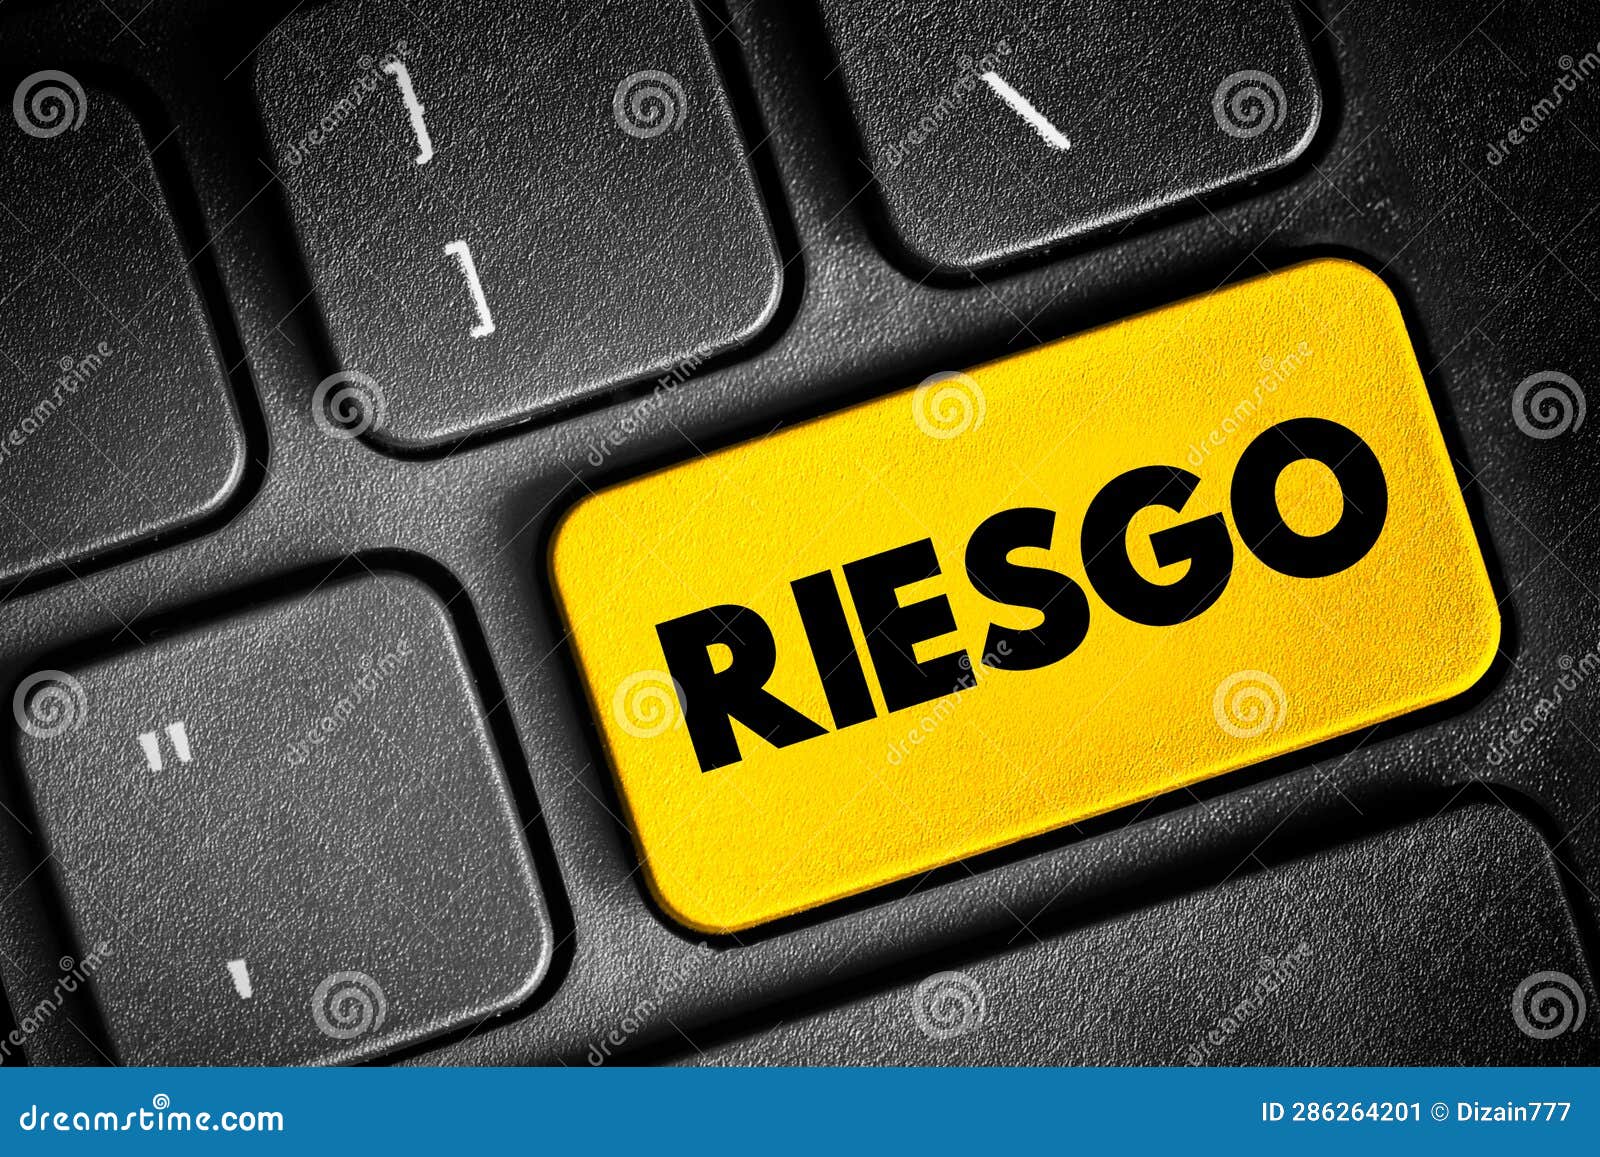 riesgo (spanish words for risk) text button on keyboard, concept background